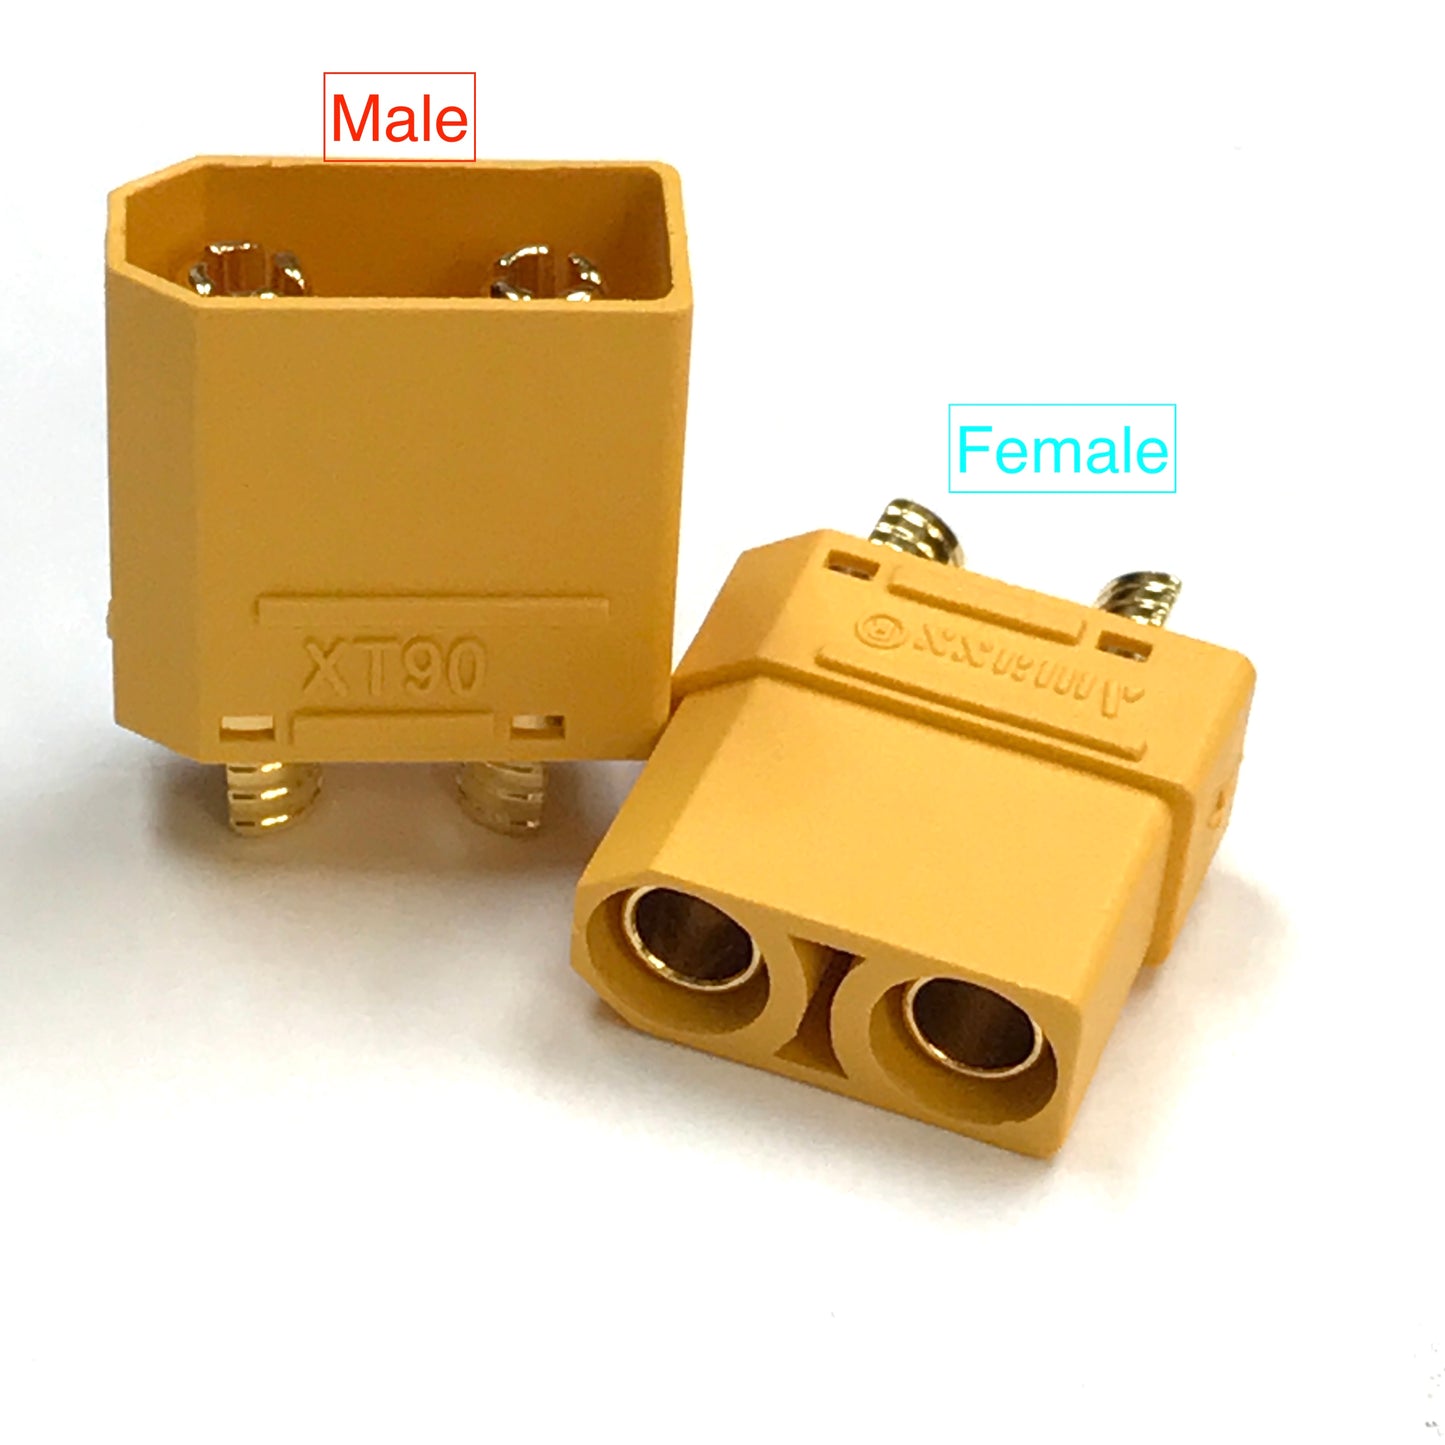 XT90-Y-MF AMASS 4.5mm Banana CONNECTOR Male & Female (1 pair)